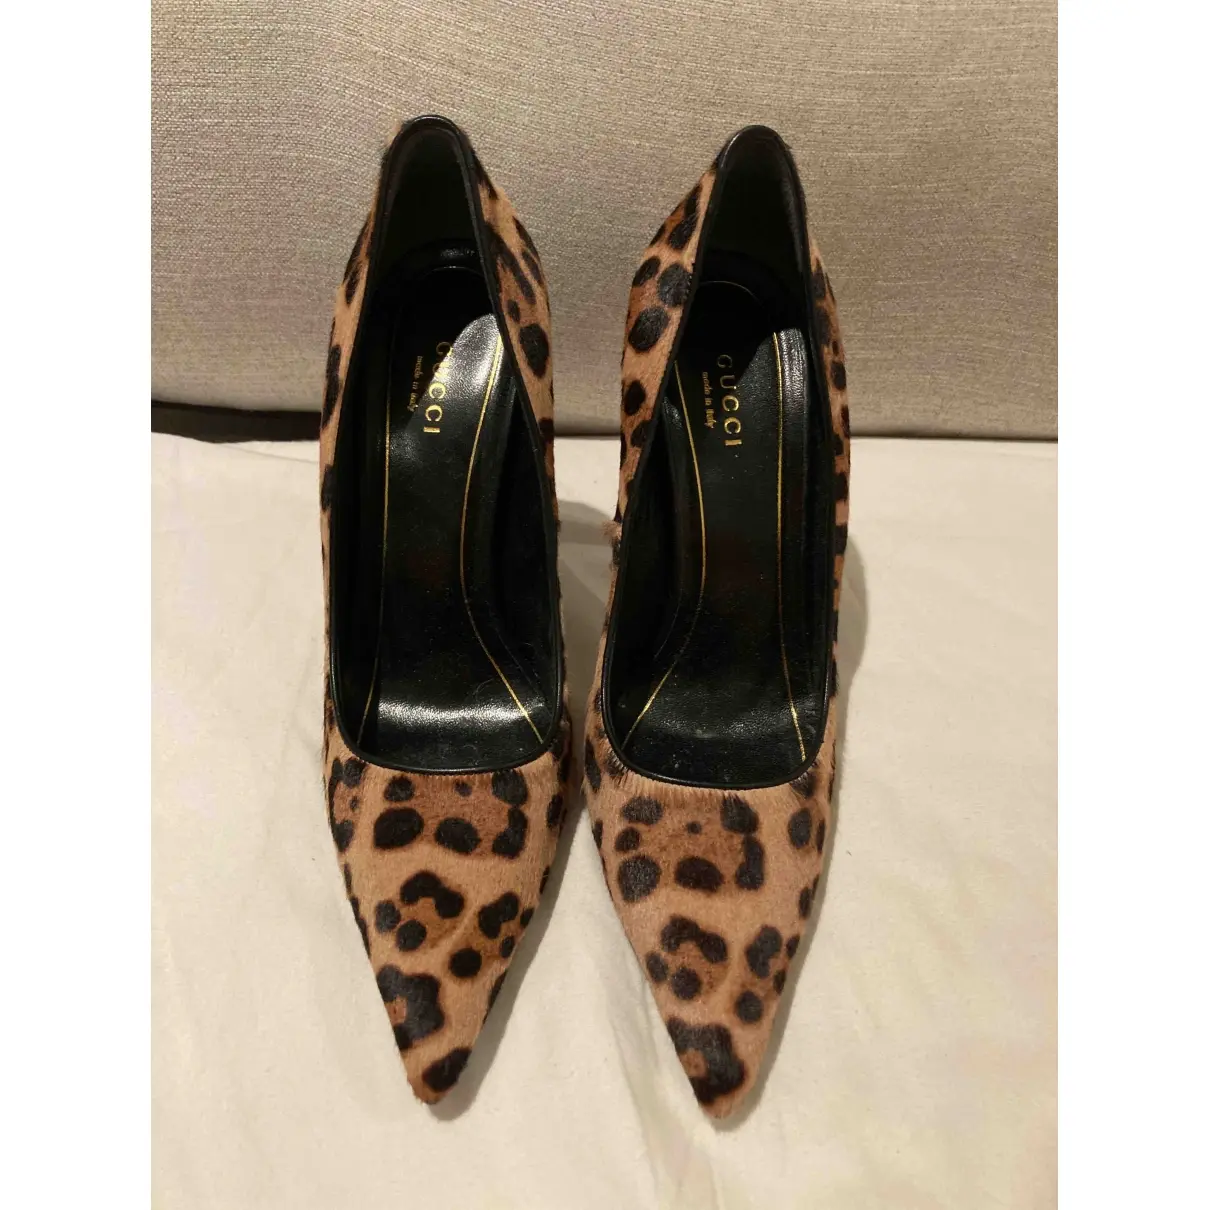 Gucci Pony-style calfskin heels for sale